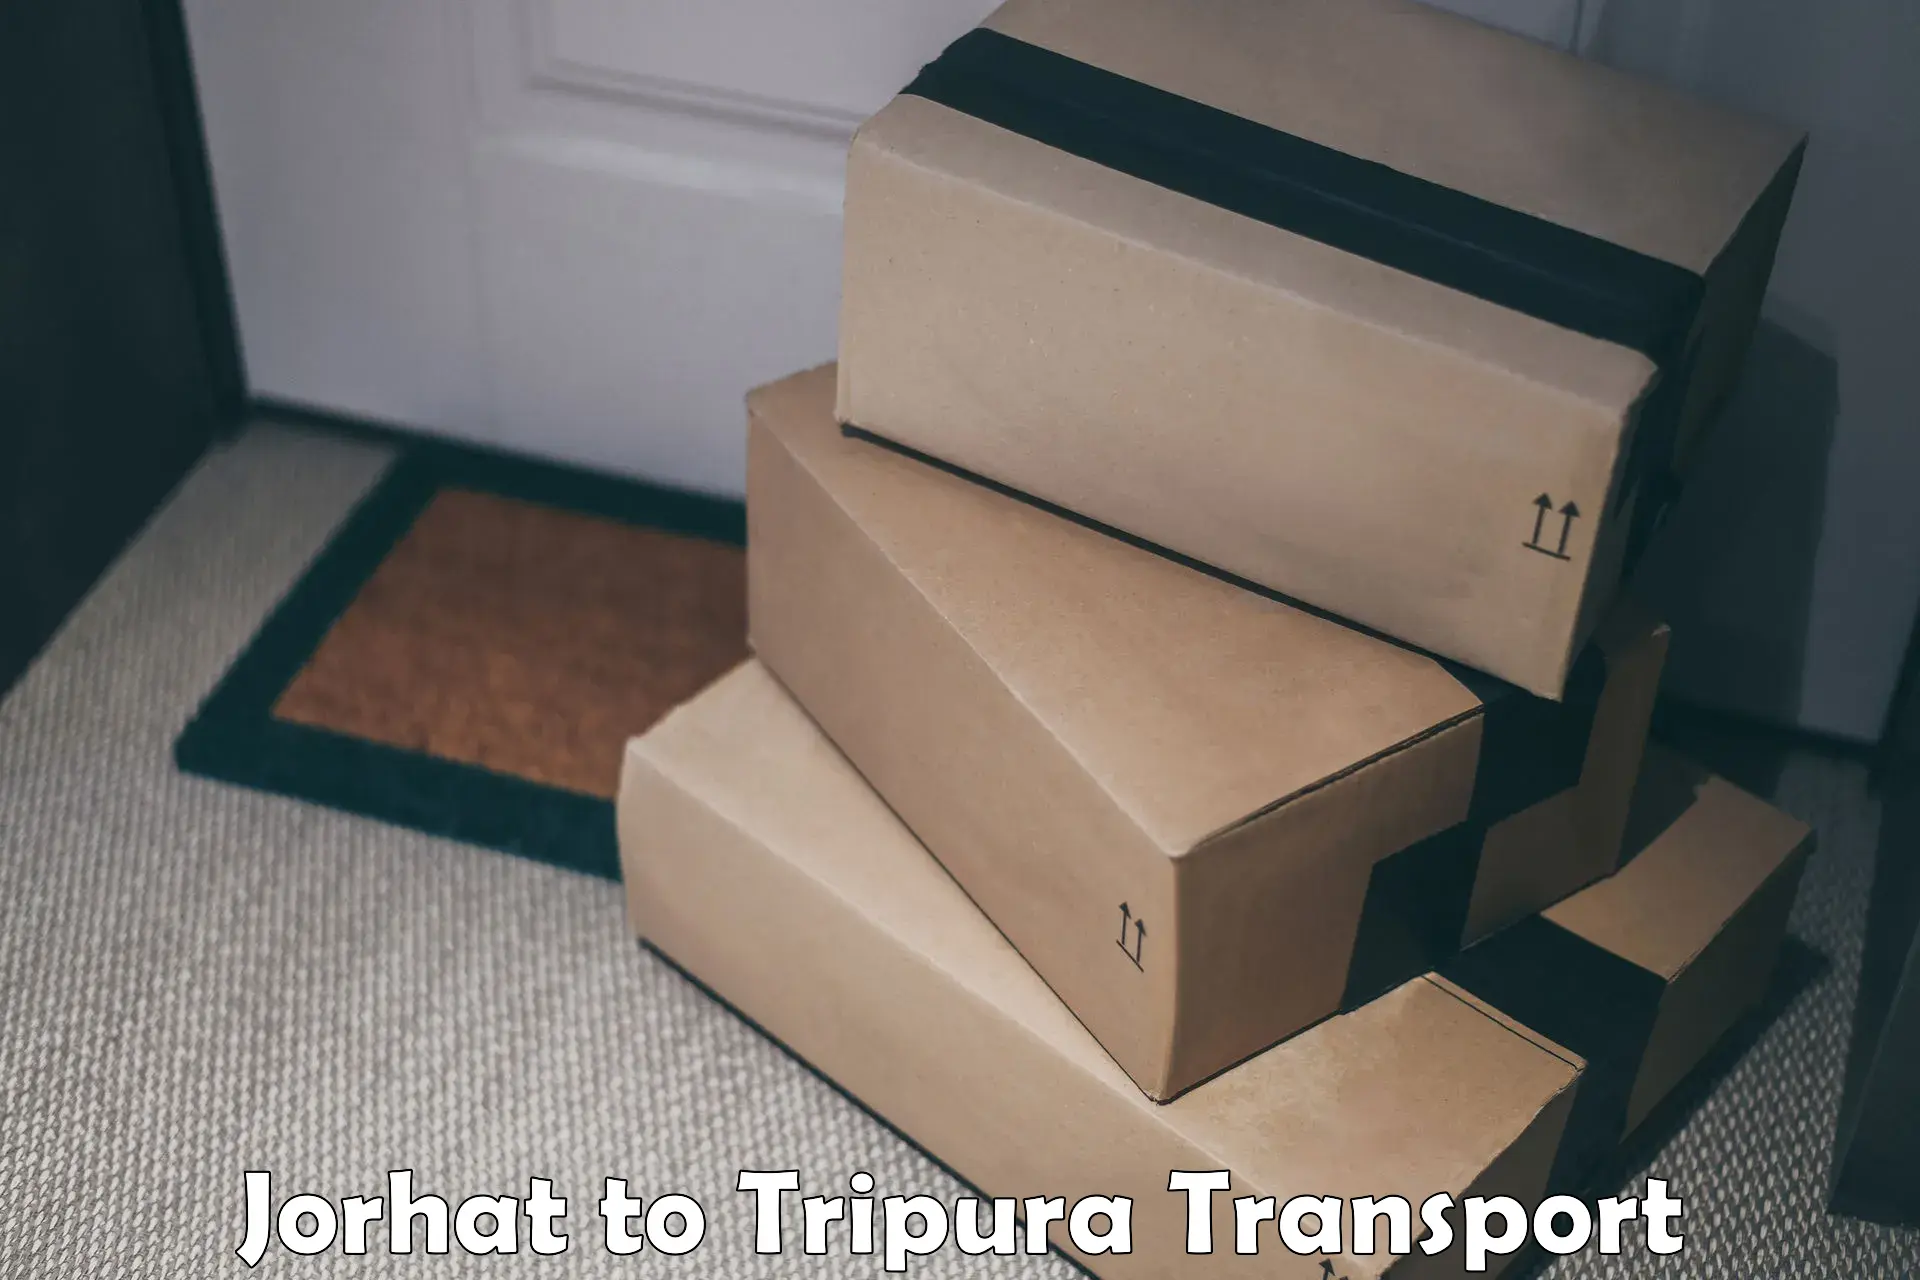 Shipping services in Jorhat to Agartala